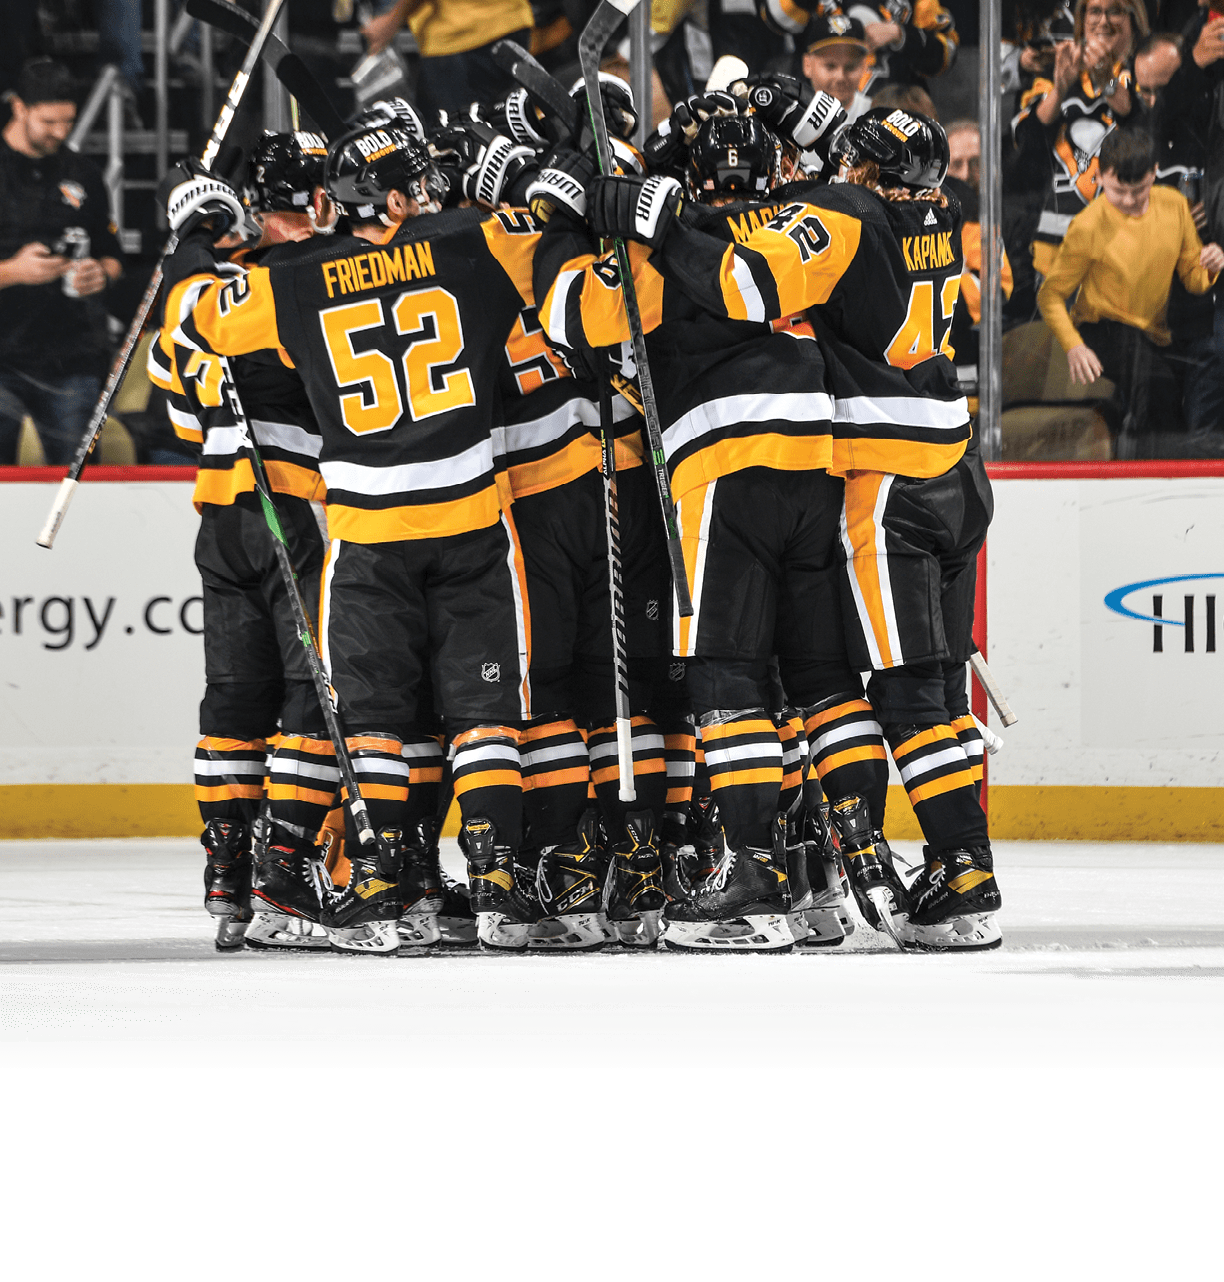 November 11, 2021 - Pittsburgh Penguins vs Florida Panthers at PPG Paints Arena  Pittsburgh won the game 3-2 in a shootout 